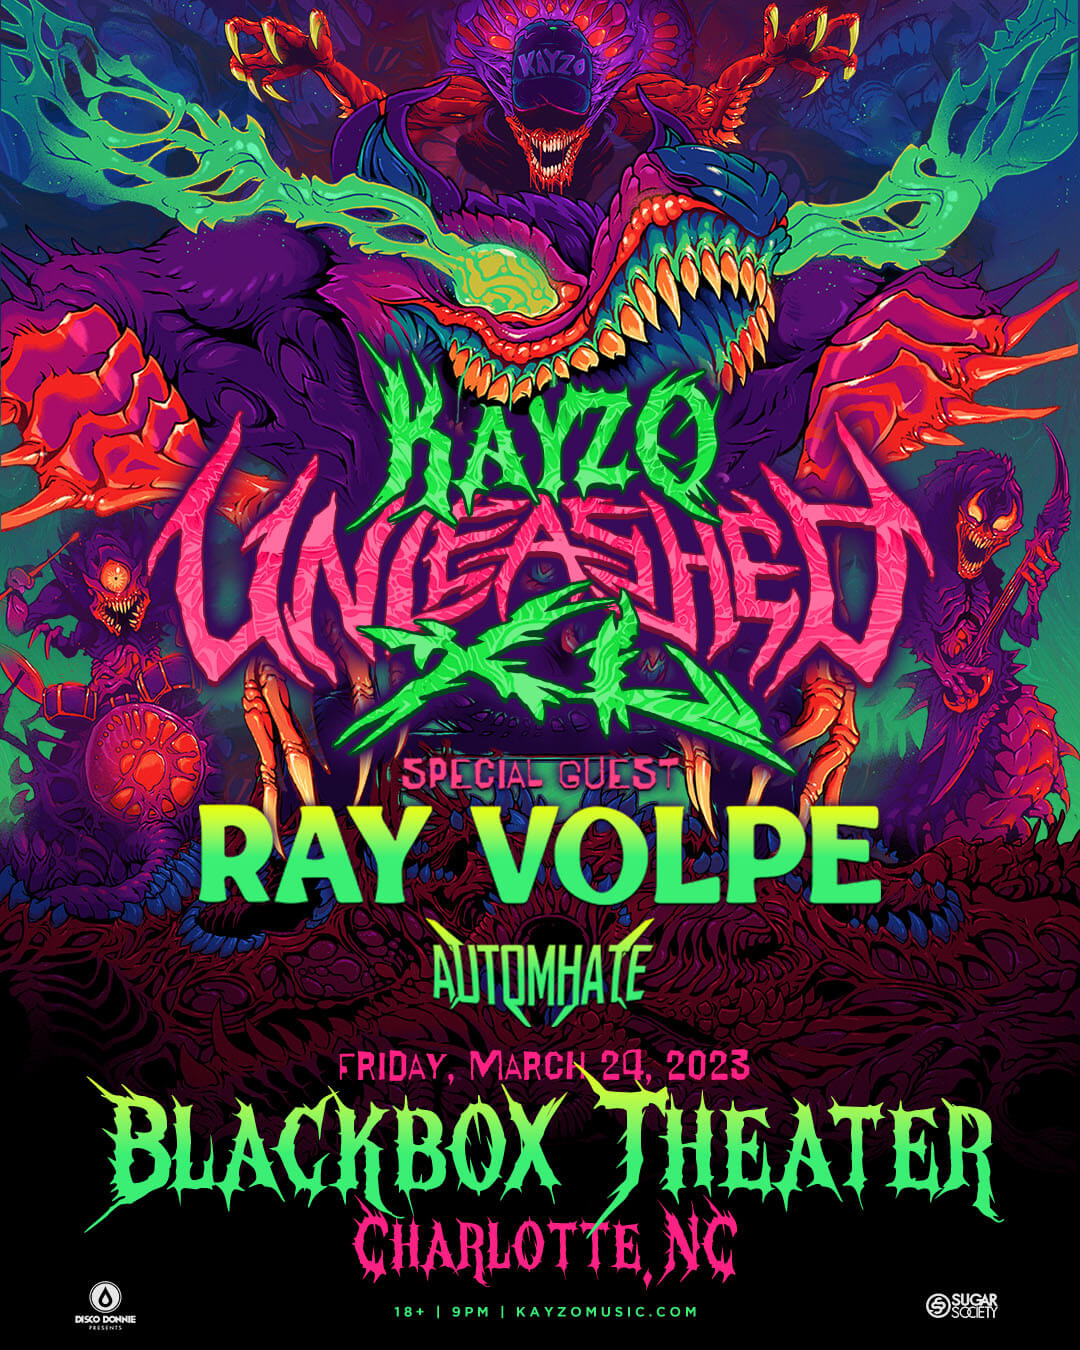 Kayzo, Ray Volpe, Automhate in Charlotte